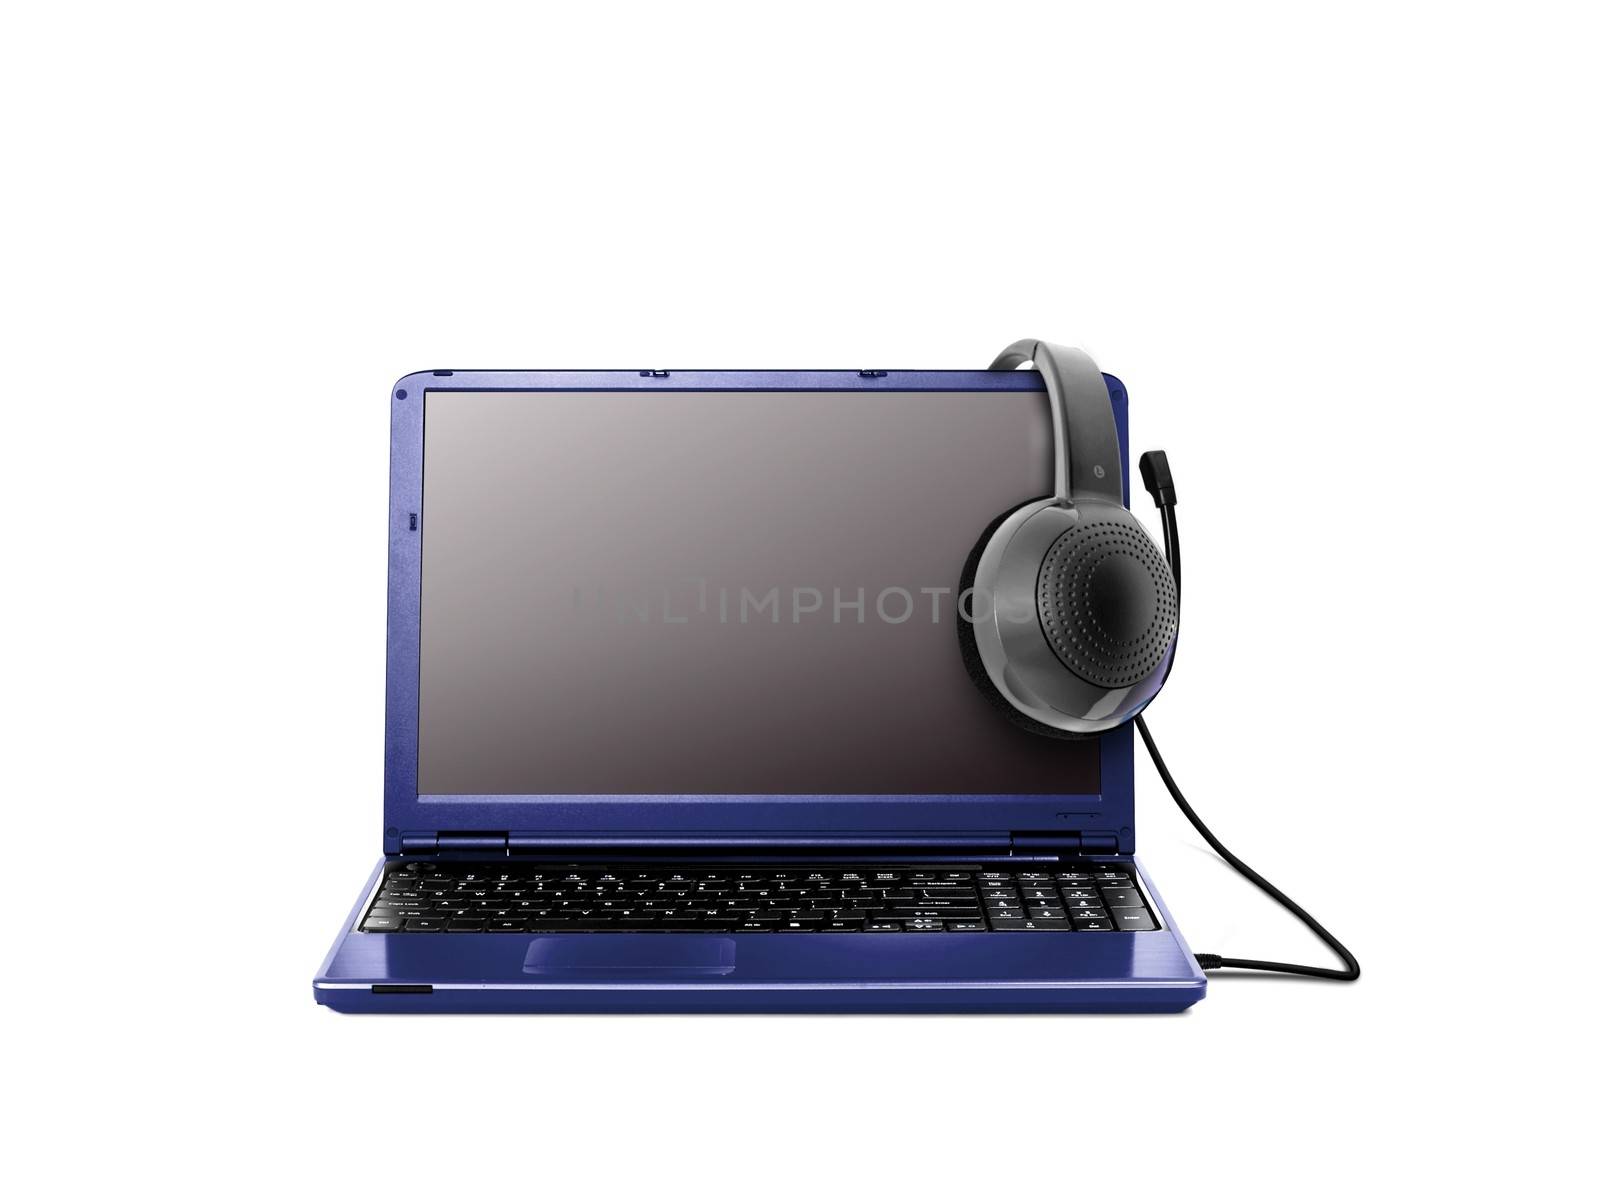 Laptop and Headphones over White